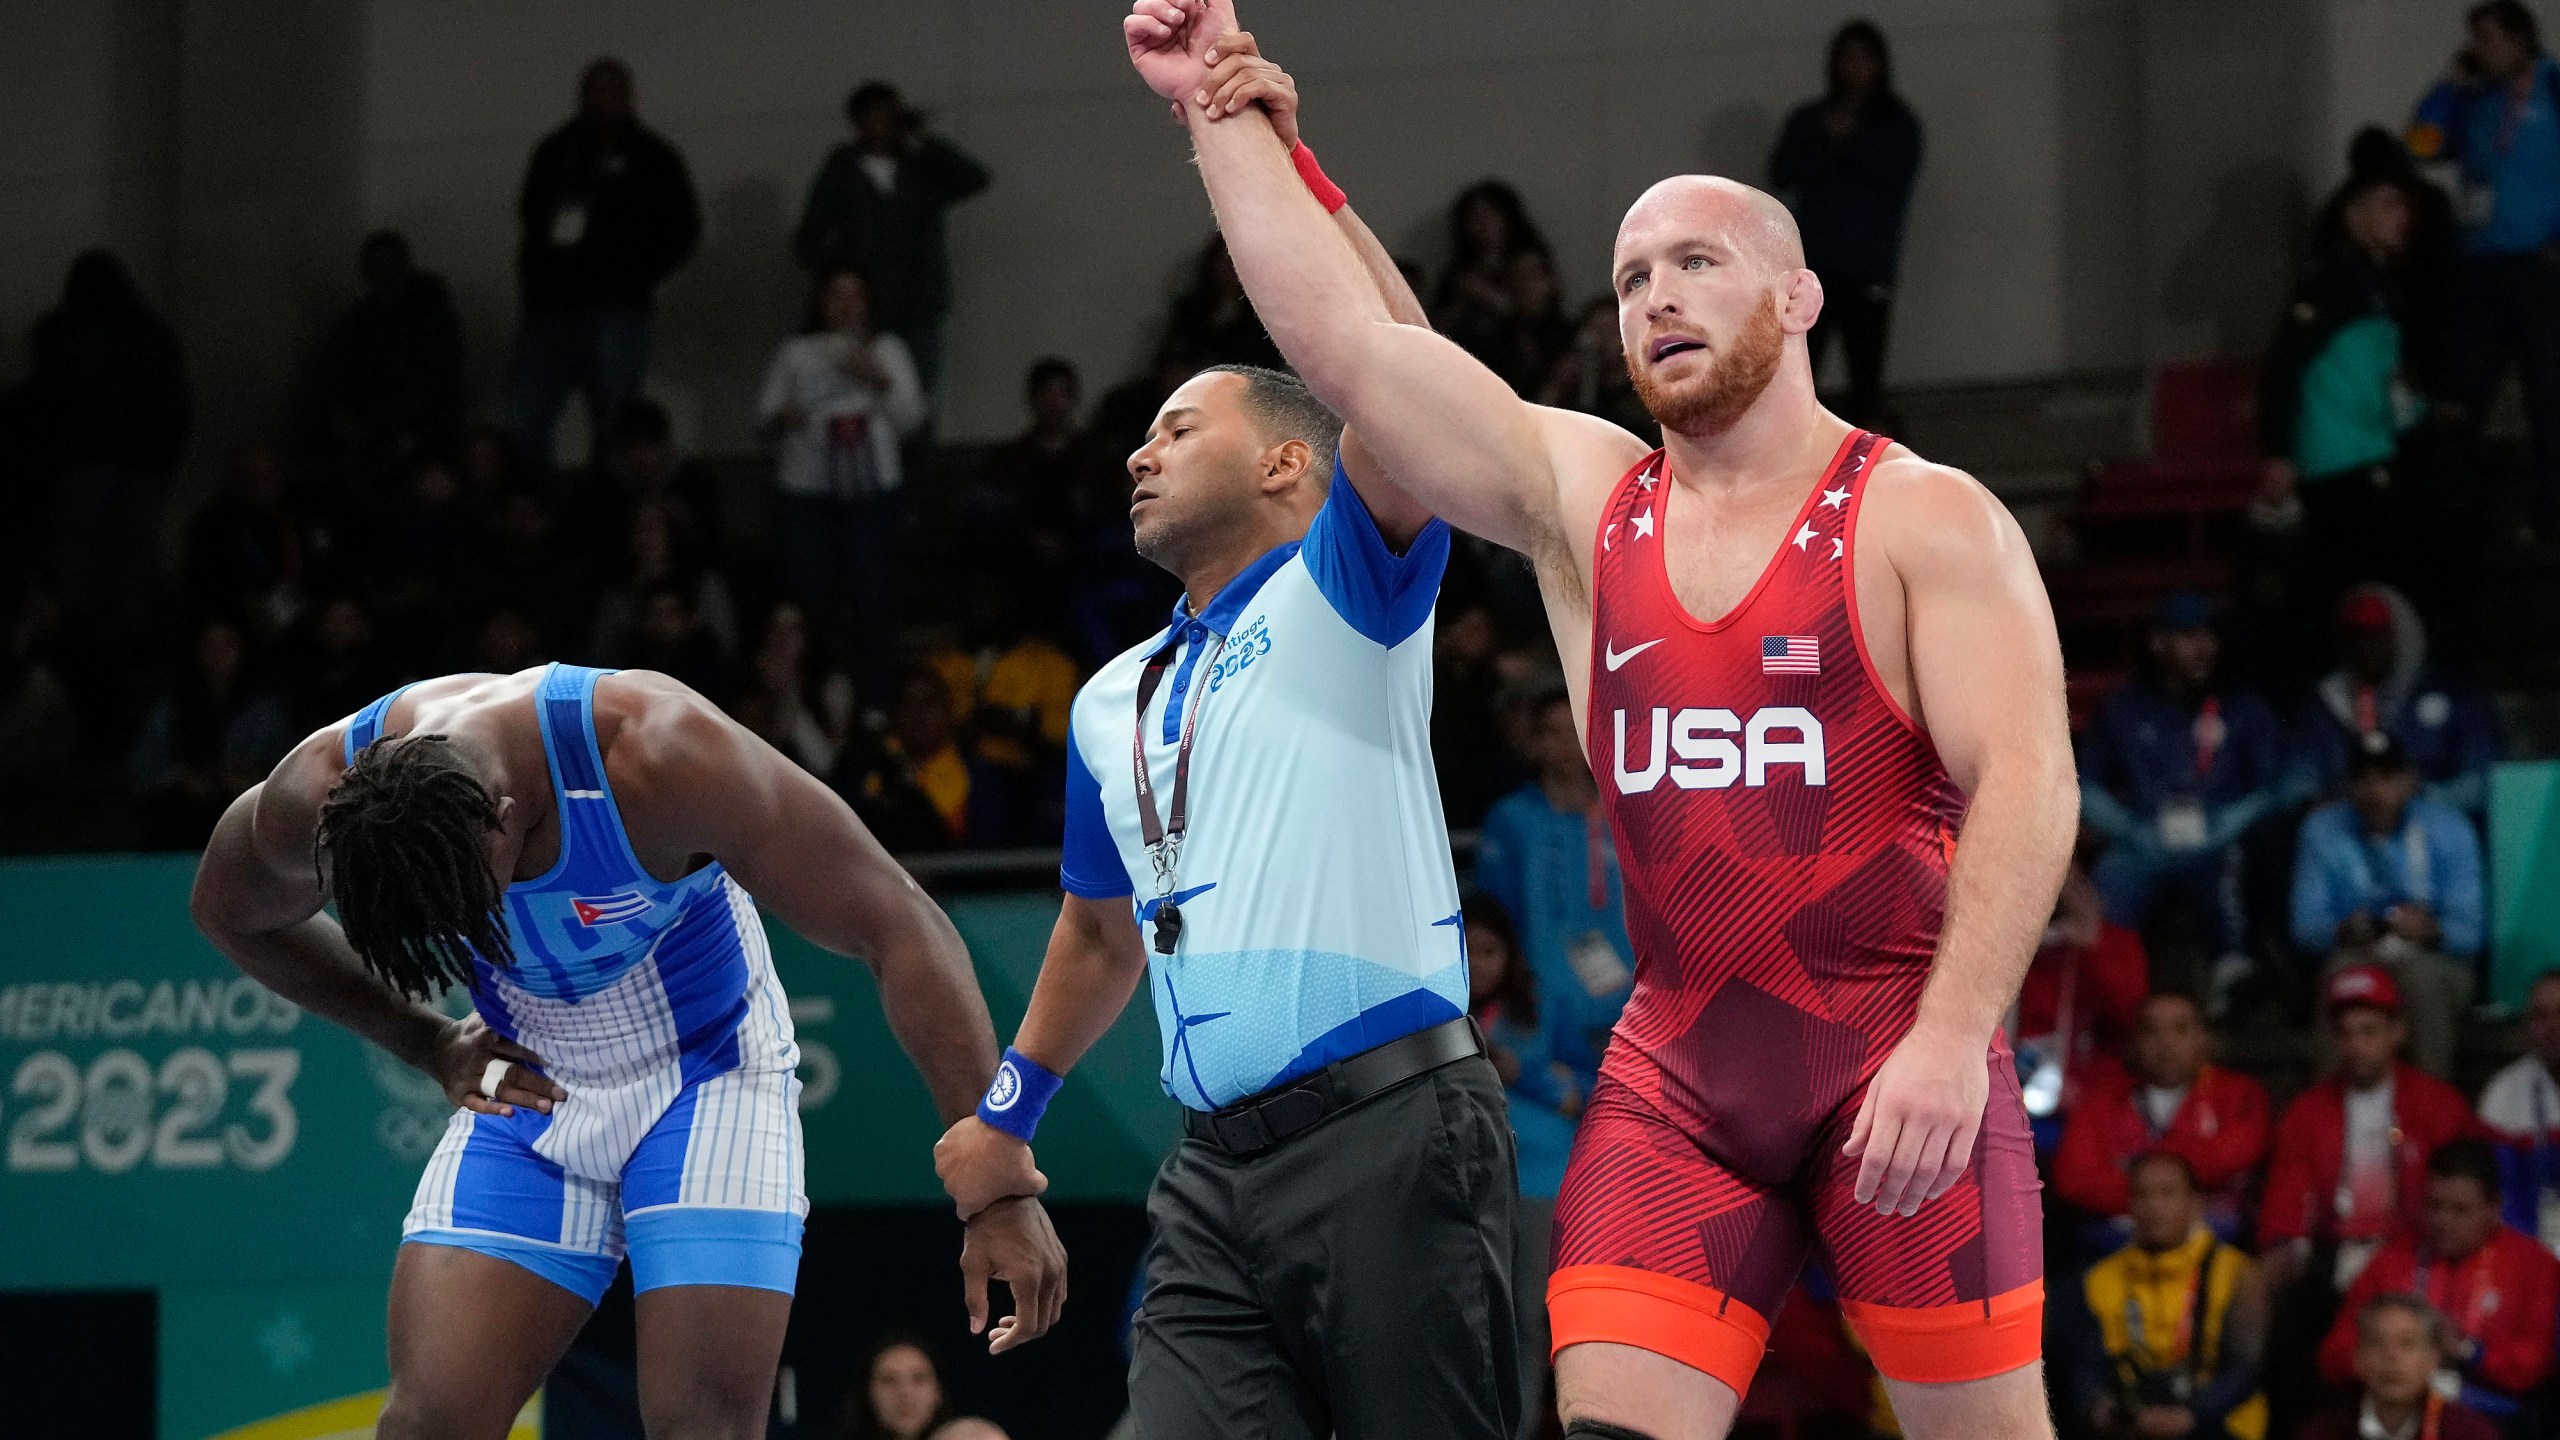 FILE - United States' Kyle Snyder, right, celebrates after winning gold against Cuba's Arturo Silot, left, during the men's 97kg wrestling freestyle final bout at the Pan American Games Santiago, Chile, Wednesday, Nov. 1, 2023. Kyle Snyder already has one of the best resumes ever for a U.S. wrestler, and he’s just now hitting his prime.(AP Photo/Matias Delacroix, File)